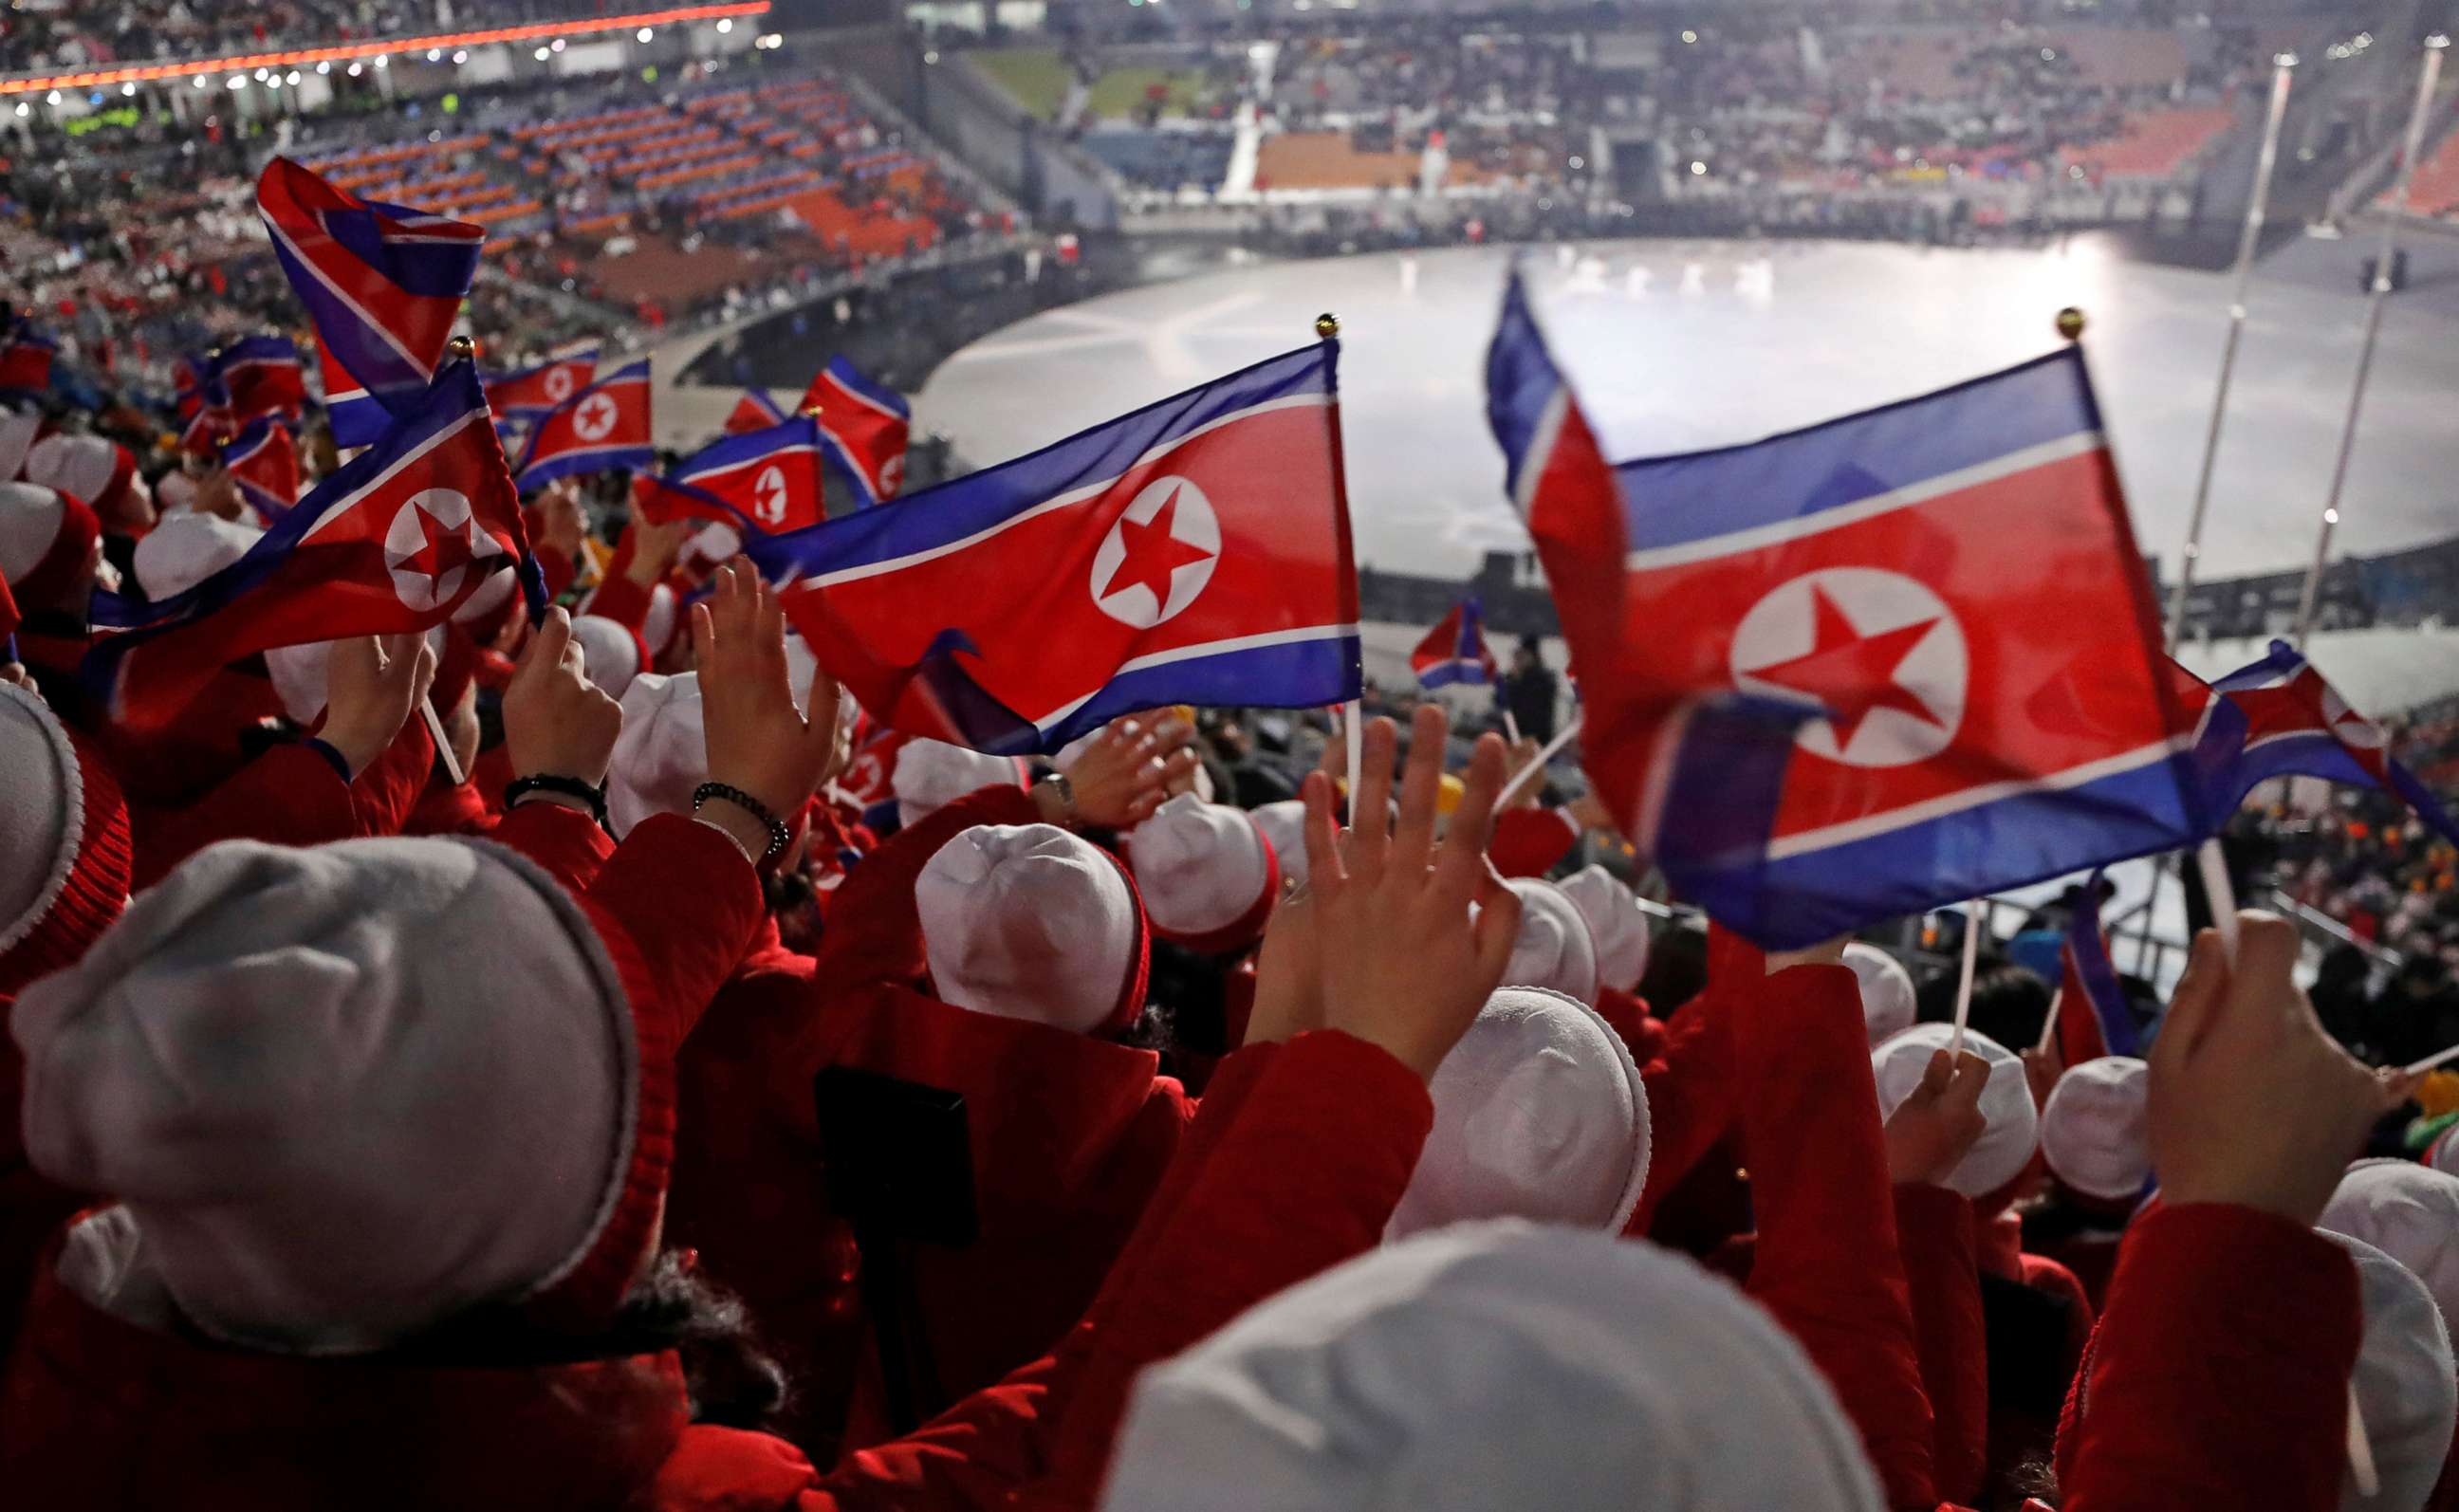 PHOTO: Members of the North Korean cheerleading team wave flags before the start of the Opening Ceremony of the Pyeongchang 2018 Winter Olympics, Feb. 9, 2018.